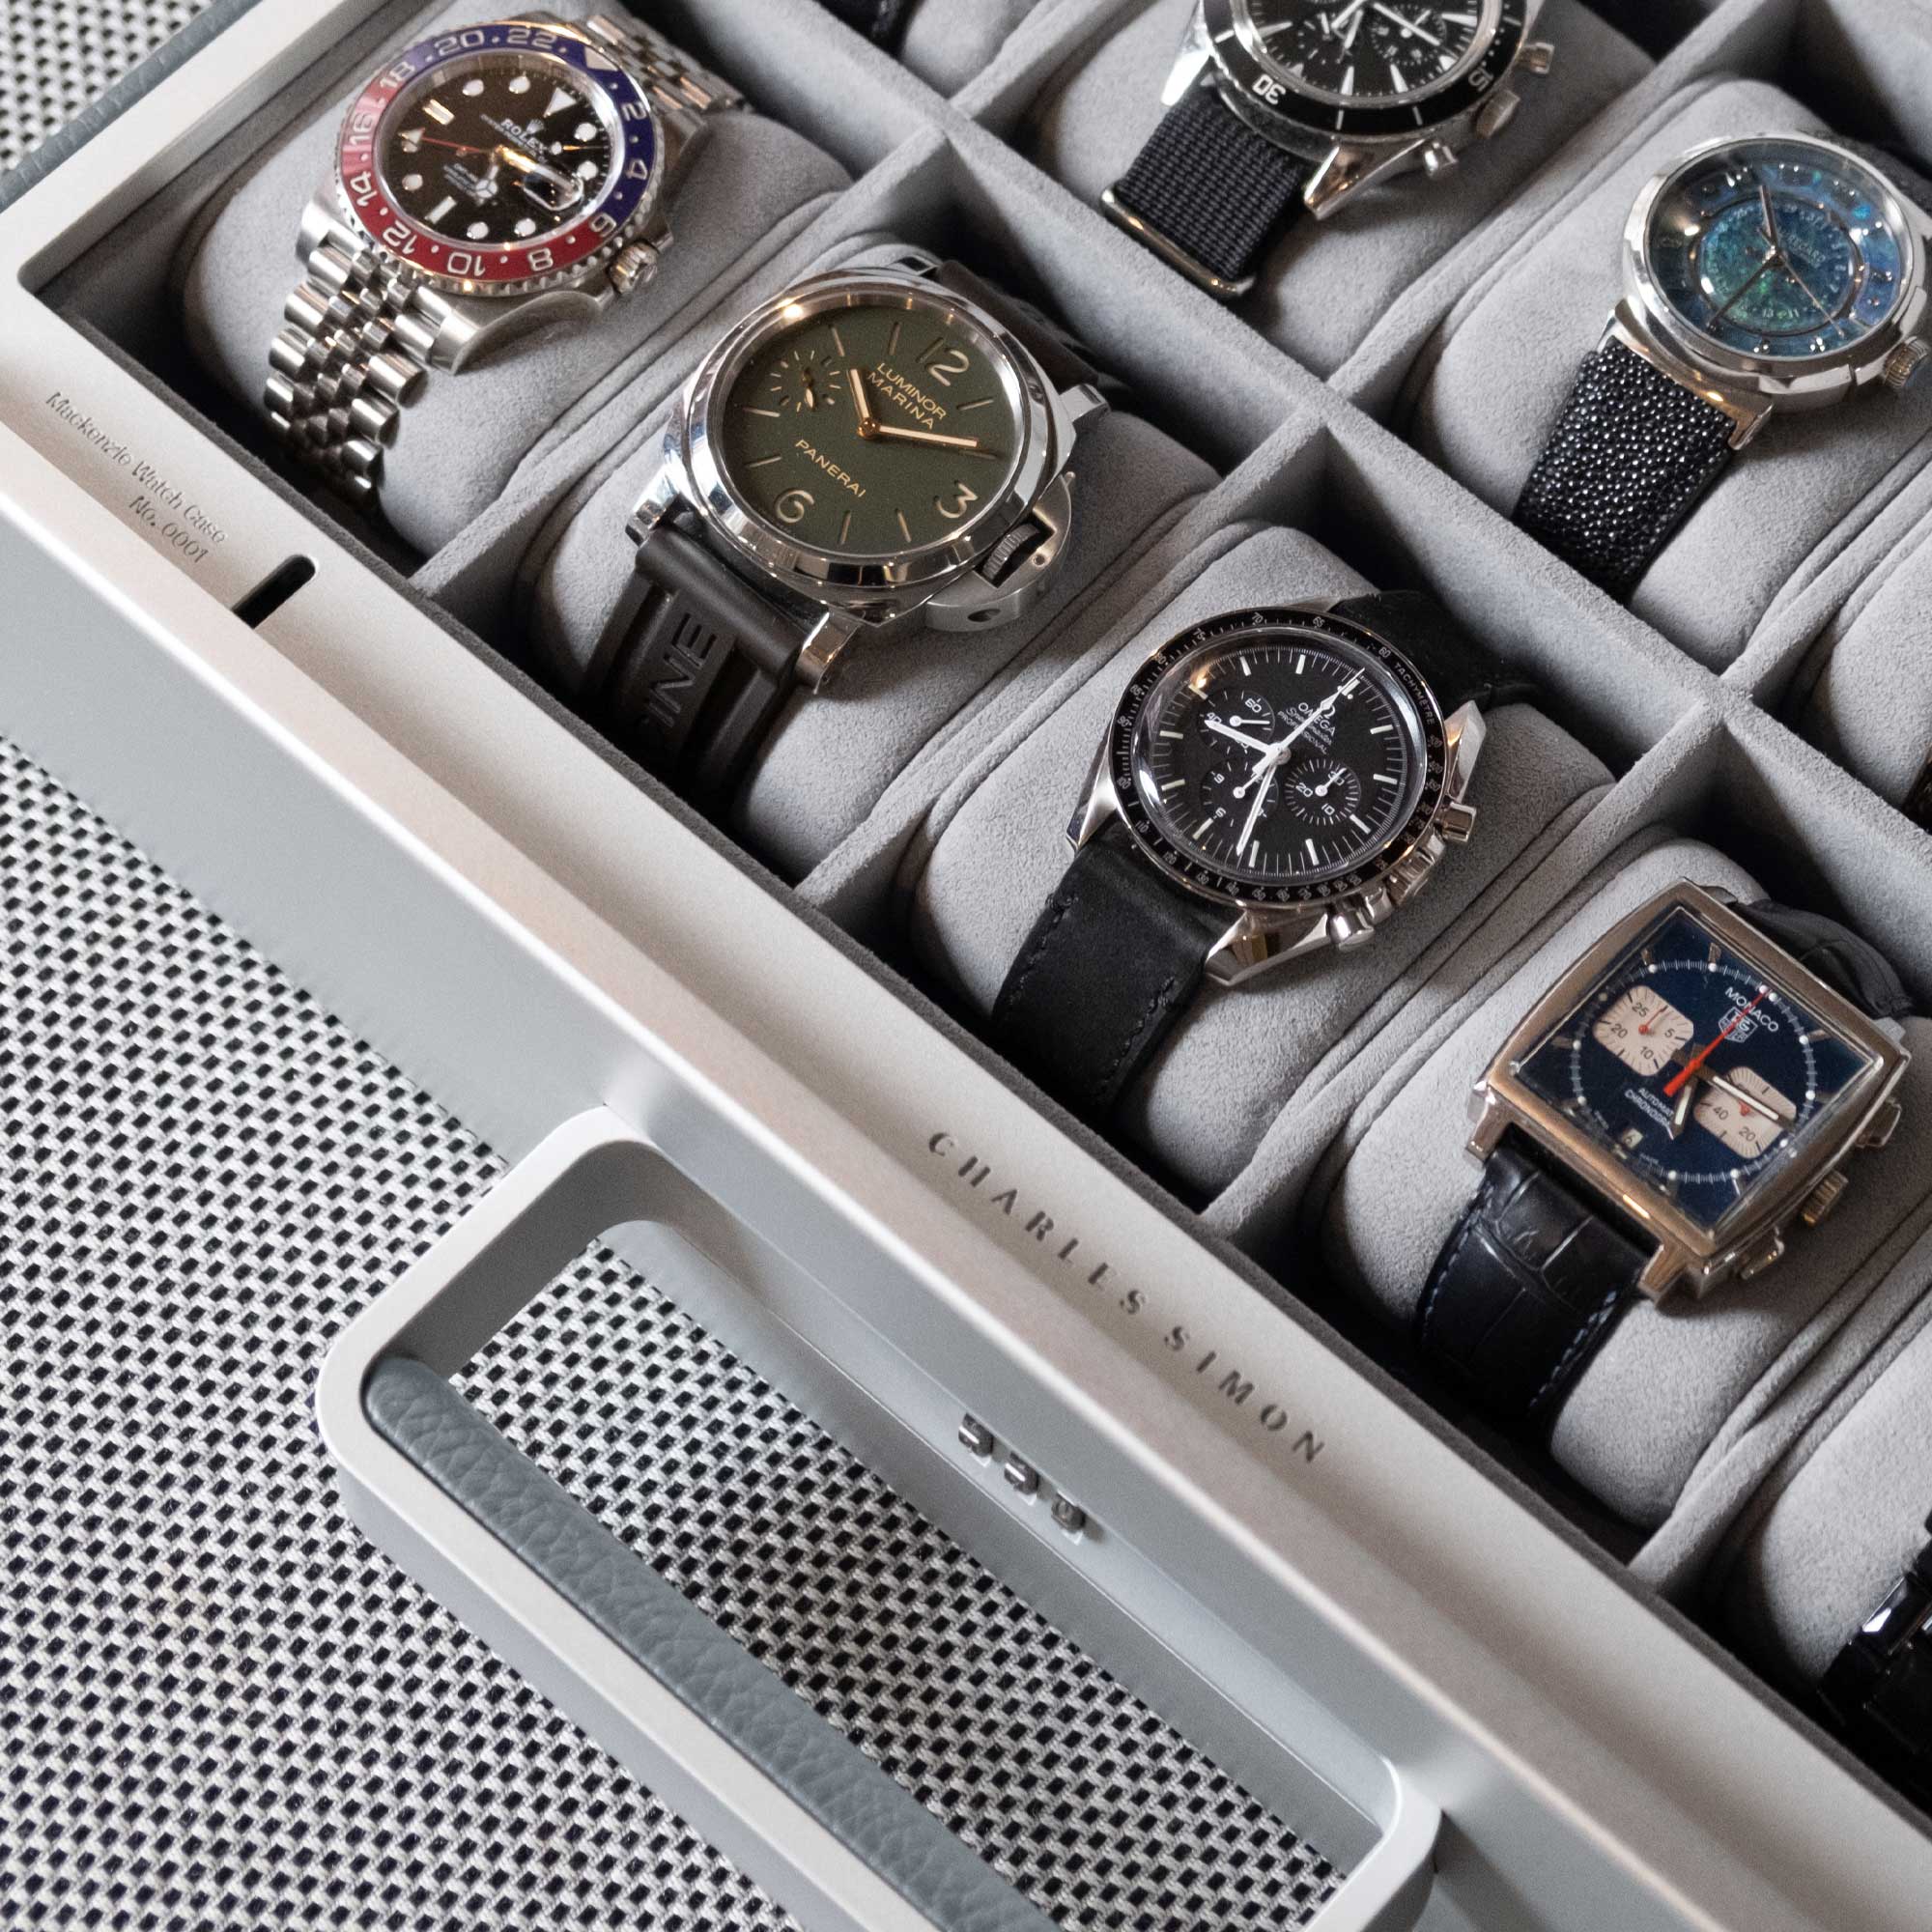 Lifestyle shot of Charles Simon handmade watch briefcase filled with luxury watches including Rolex, Panerai and Omega